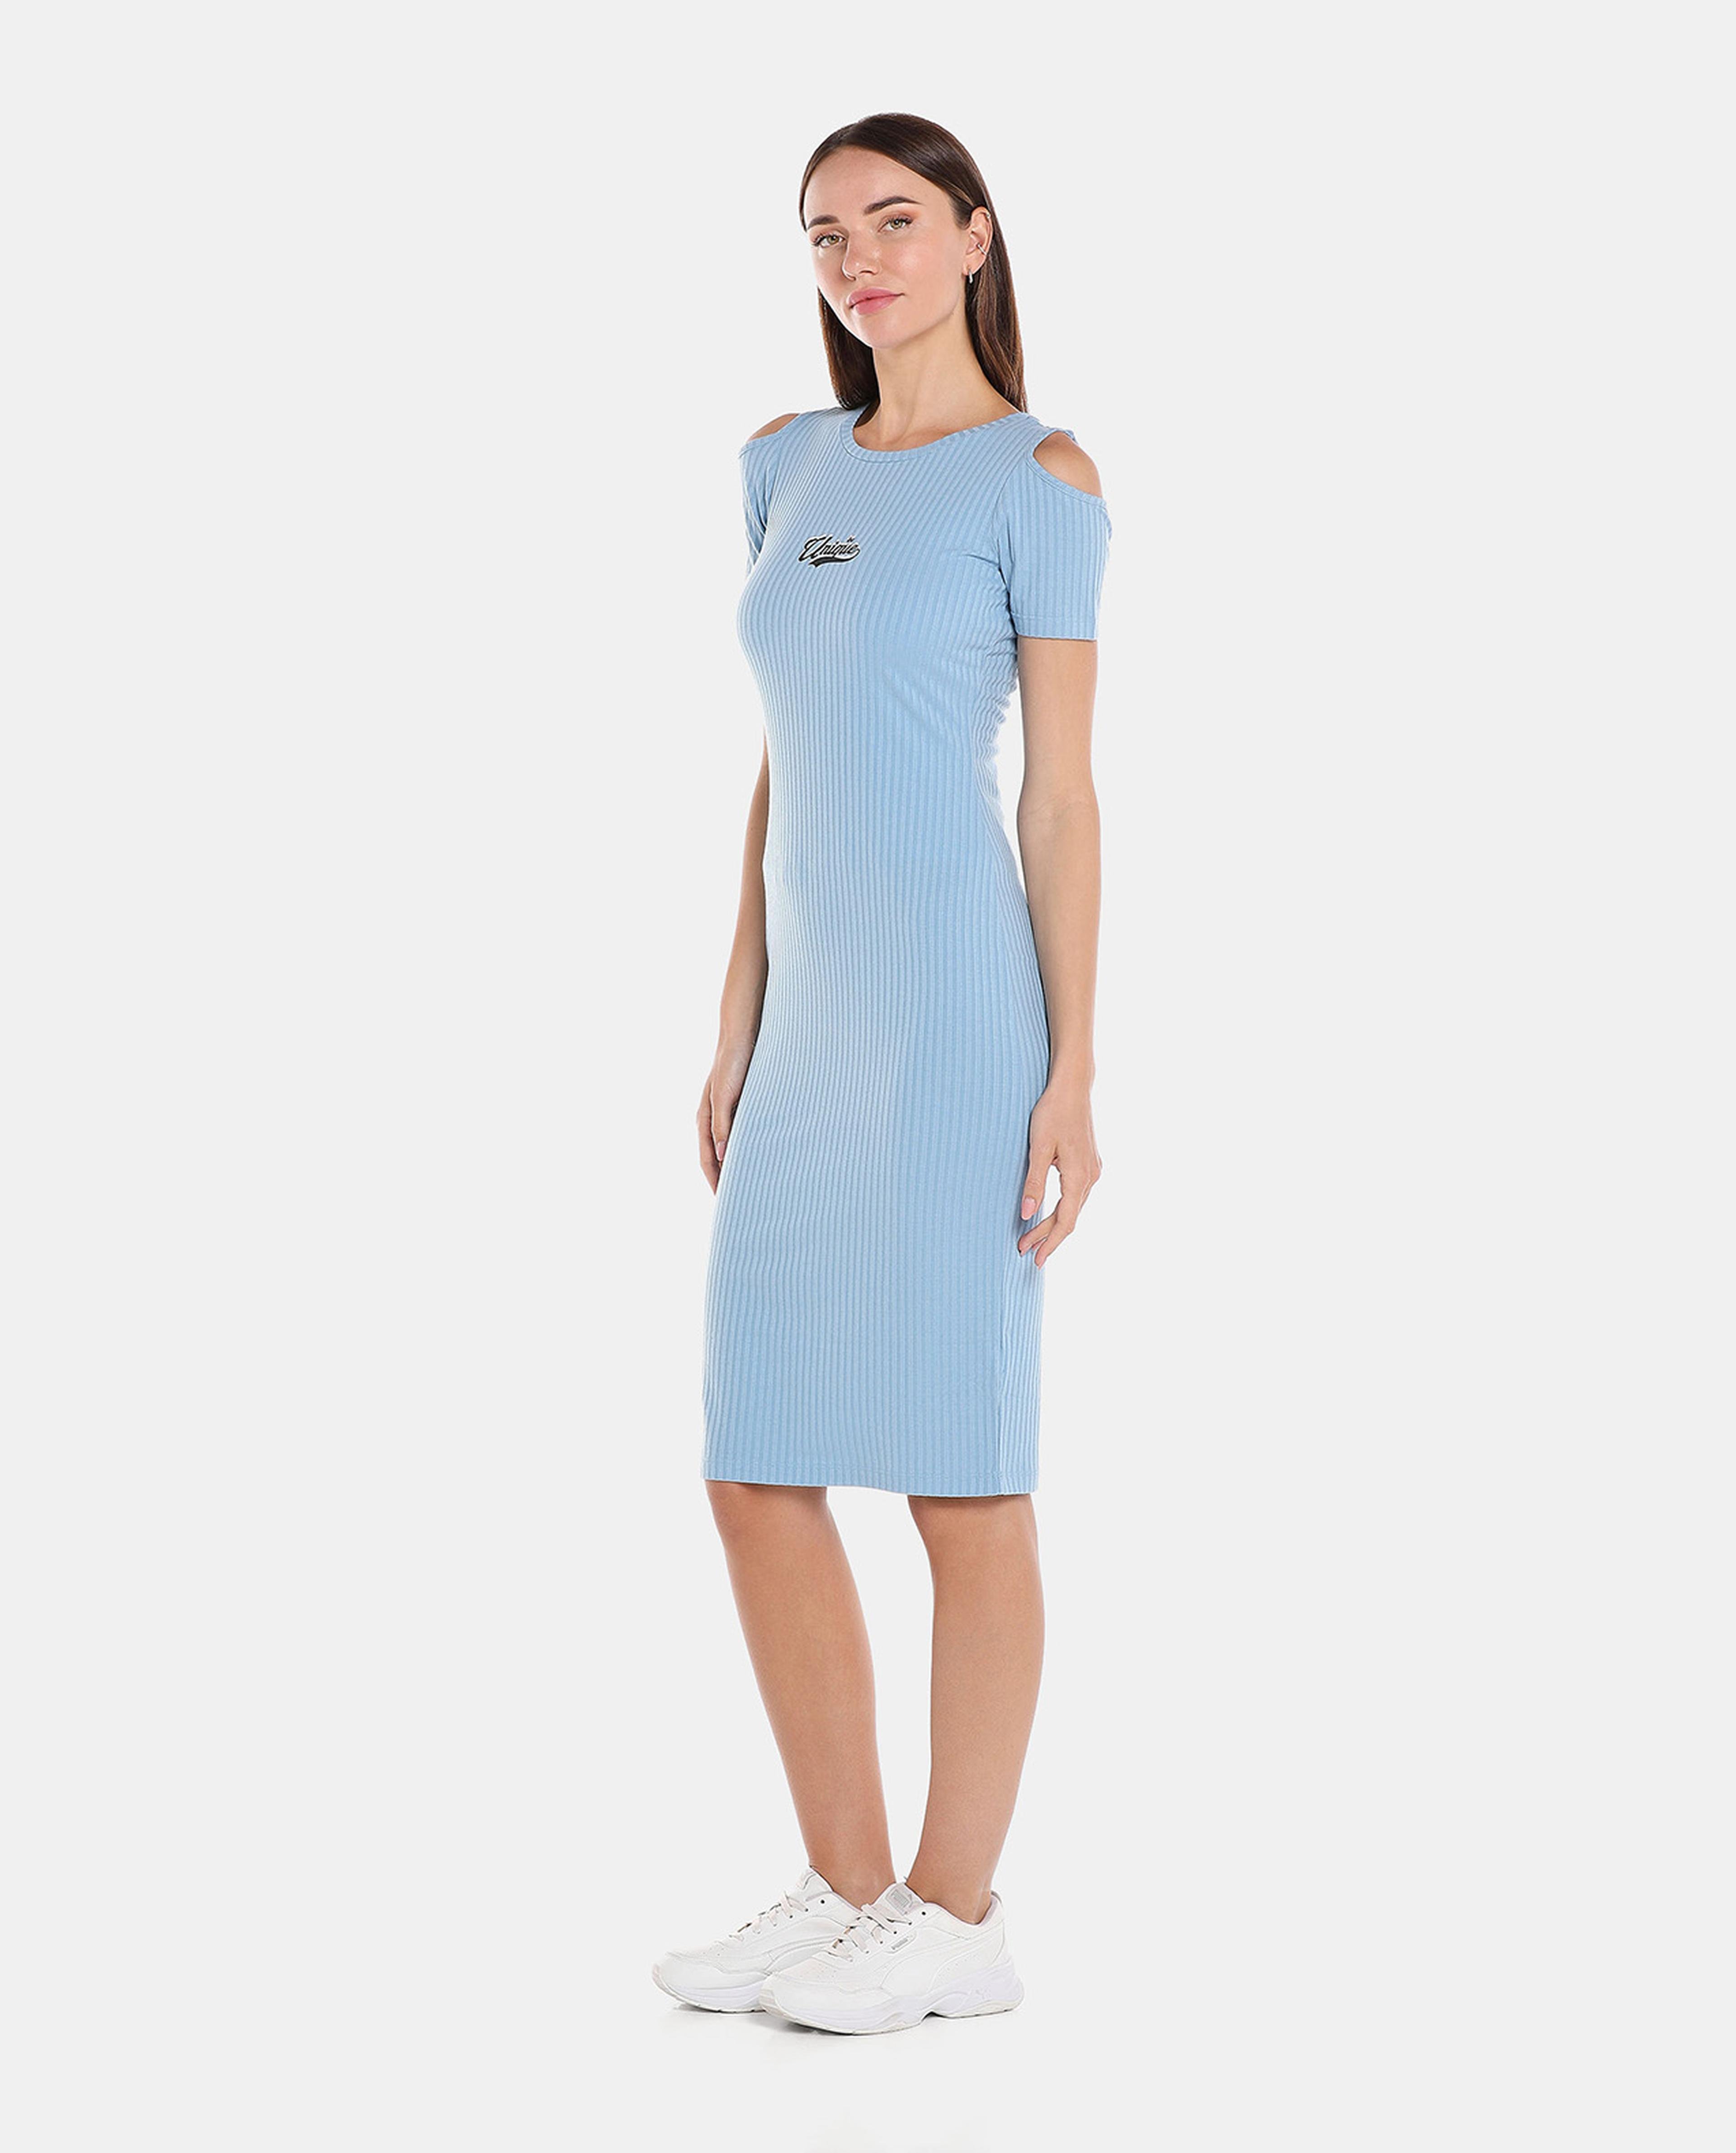 Blue Solid Bodycon Knee Length Dress